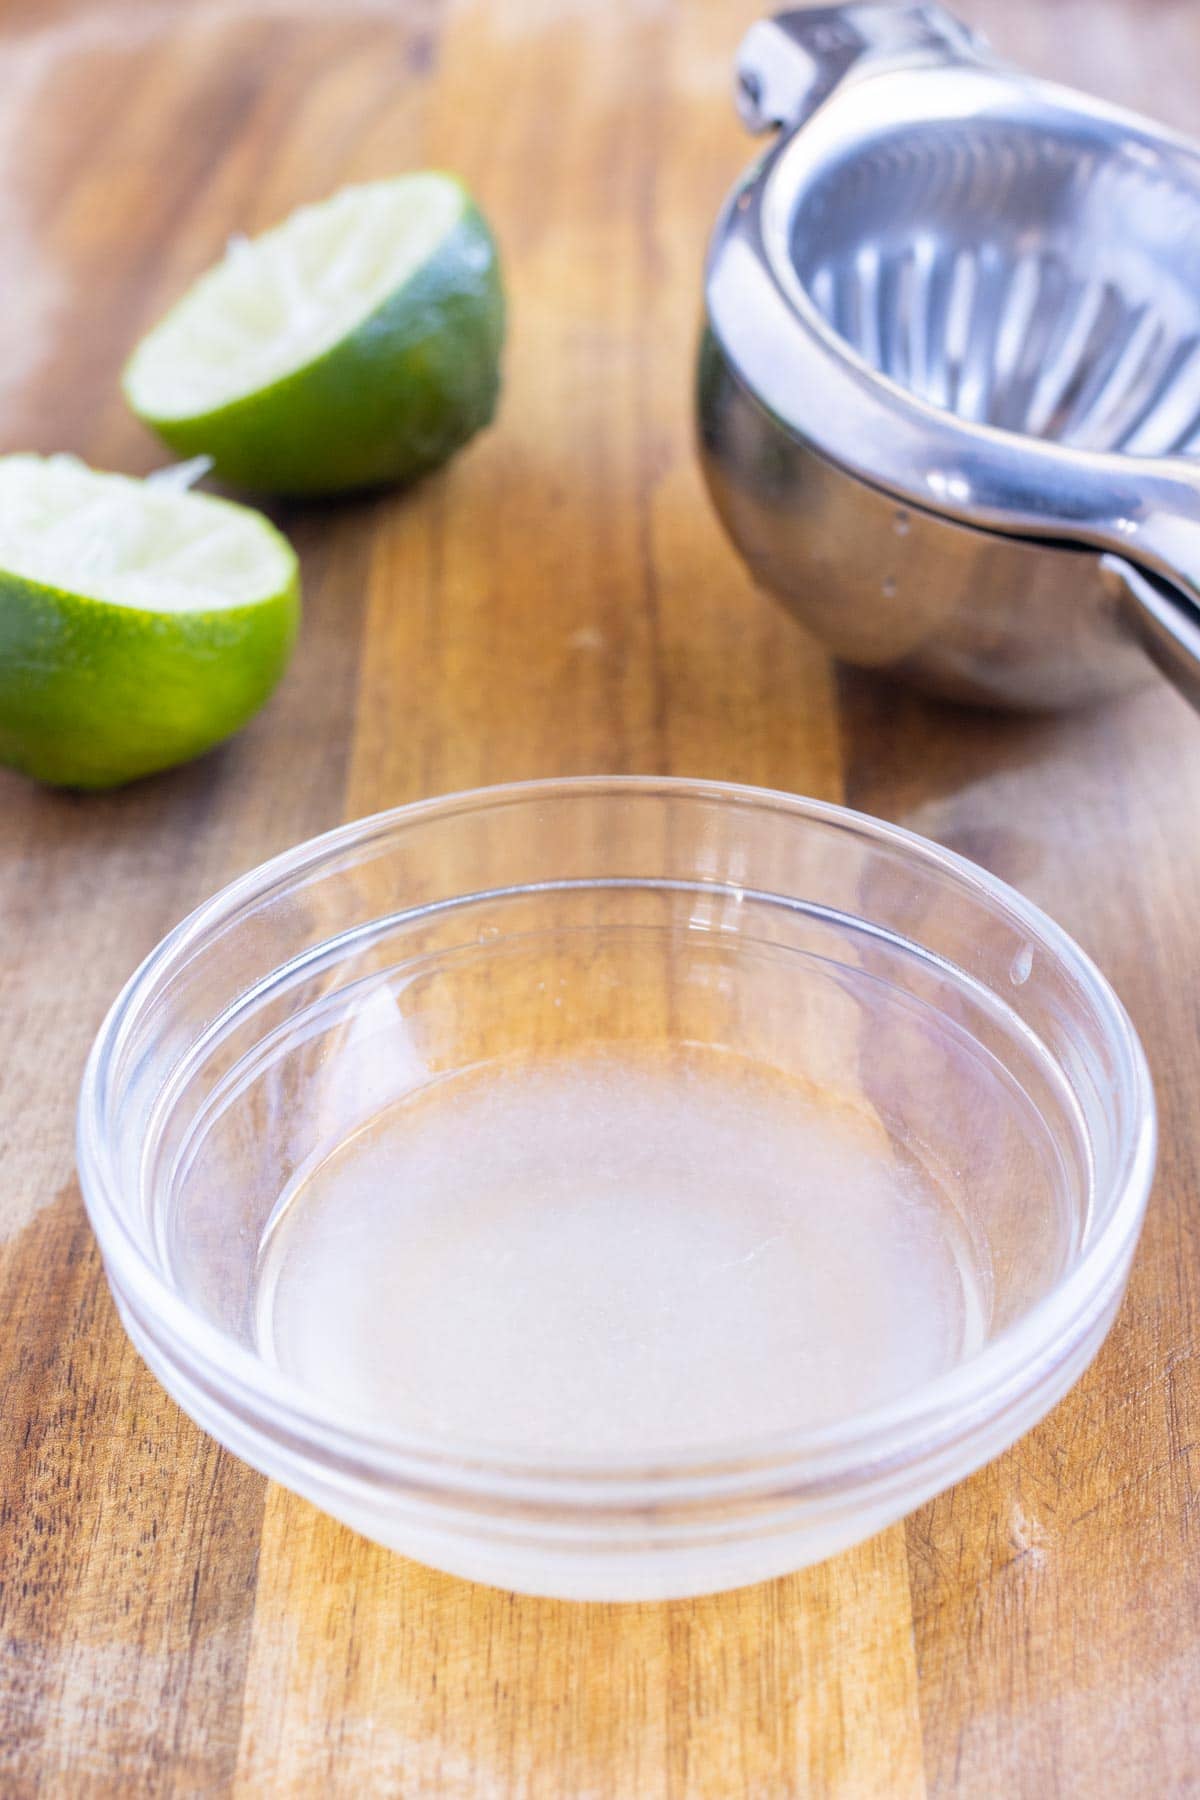 Limes are cut in half and juiced into a bowl.